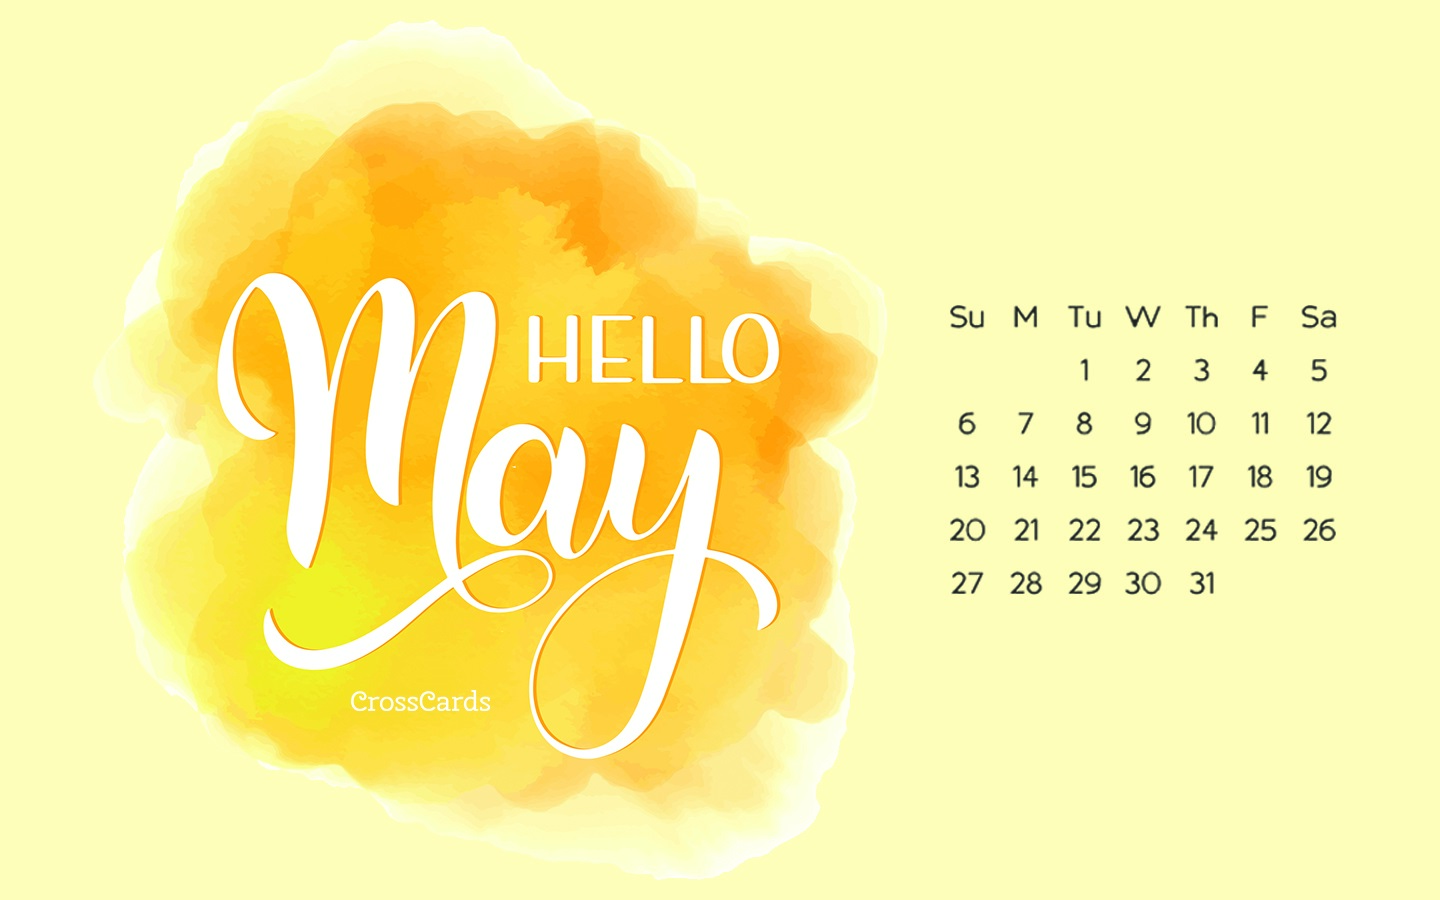 May 2022 Calendar Wallpaper: Download Free High Quality Designs for